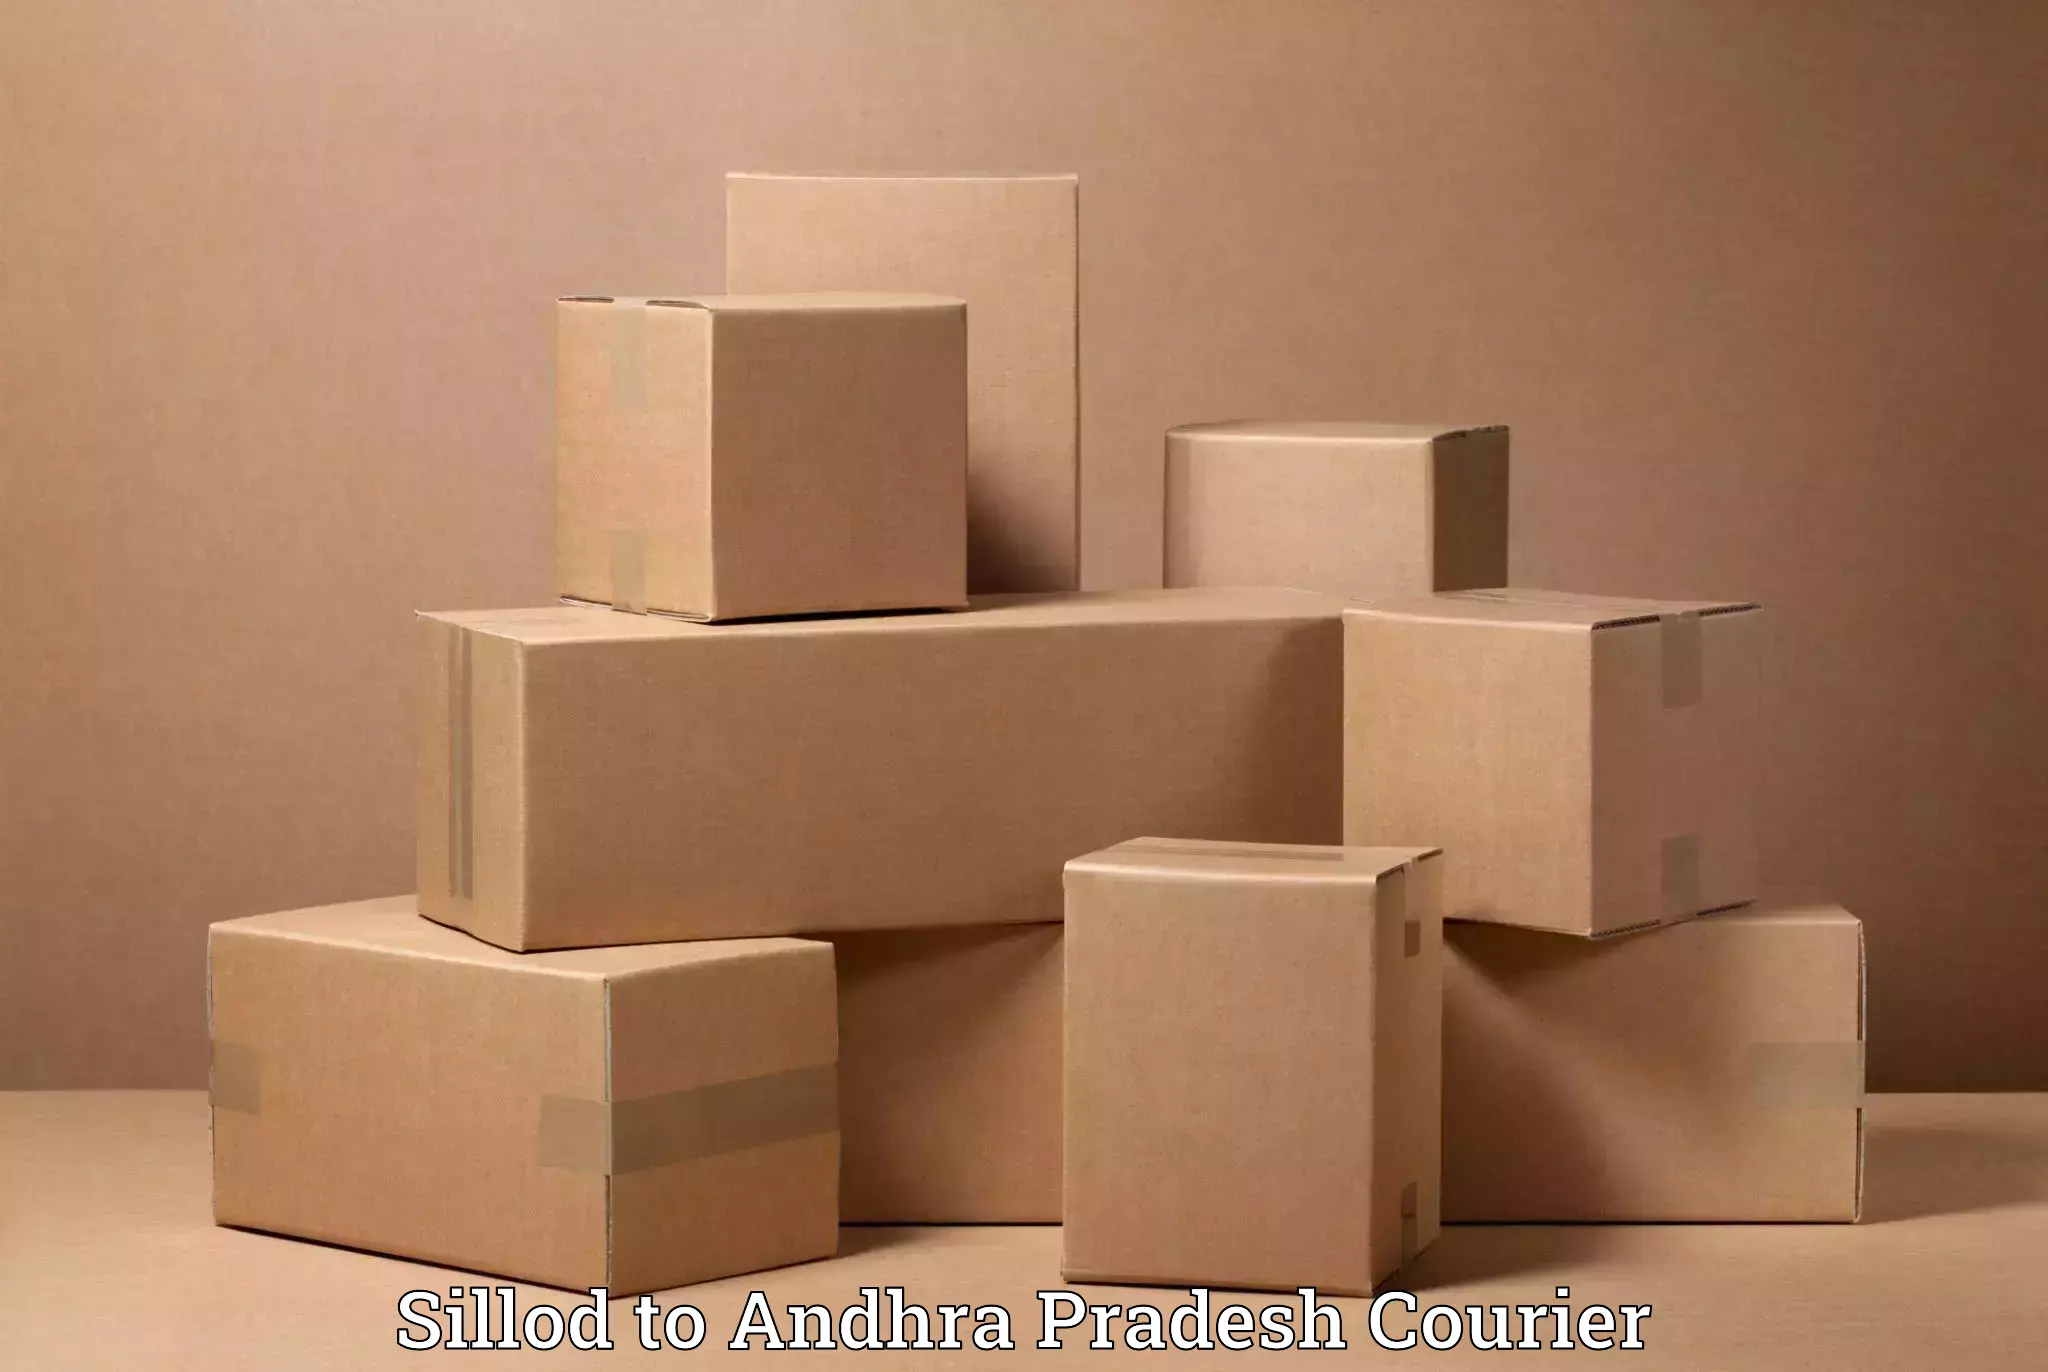 Professional furniture shifting in Sillod to Visakhapatnam Port